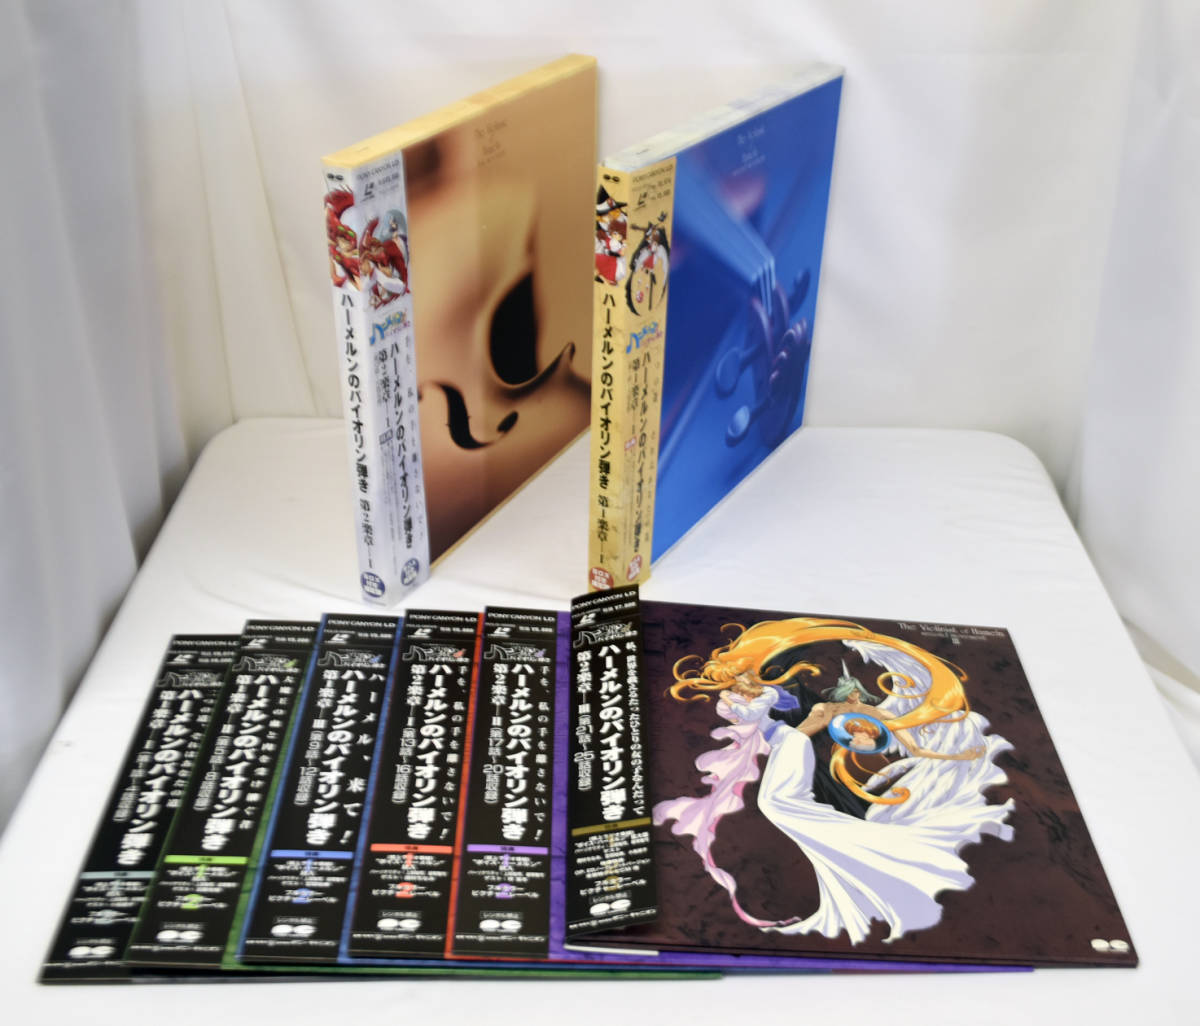 S785* Special made LD-2BOX attaching LD 6 volume * Violinist of Hamelin no. 1 comfort chapter & no. 2 comfort chapter * all 25 story * Watanabe road Akira * obi attaching * laser disk θ